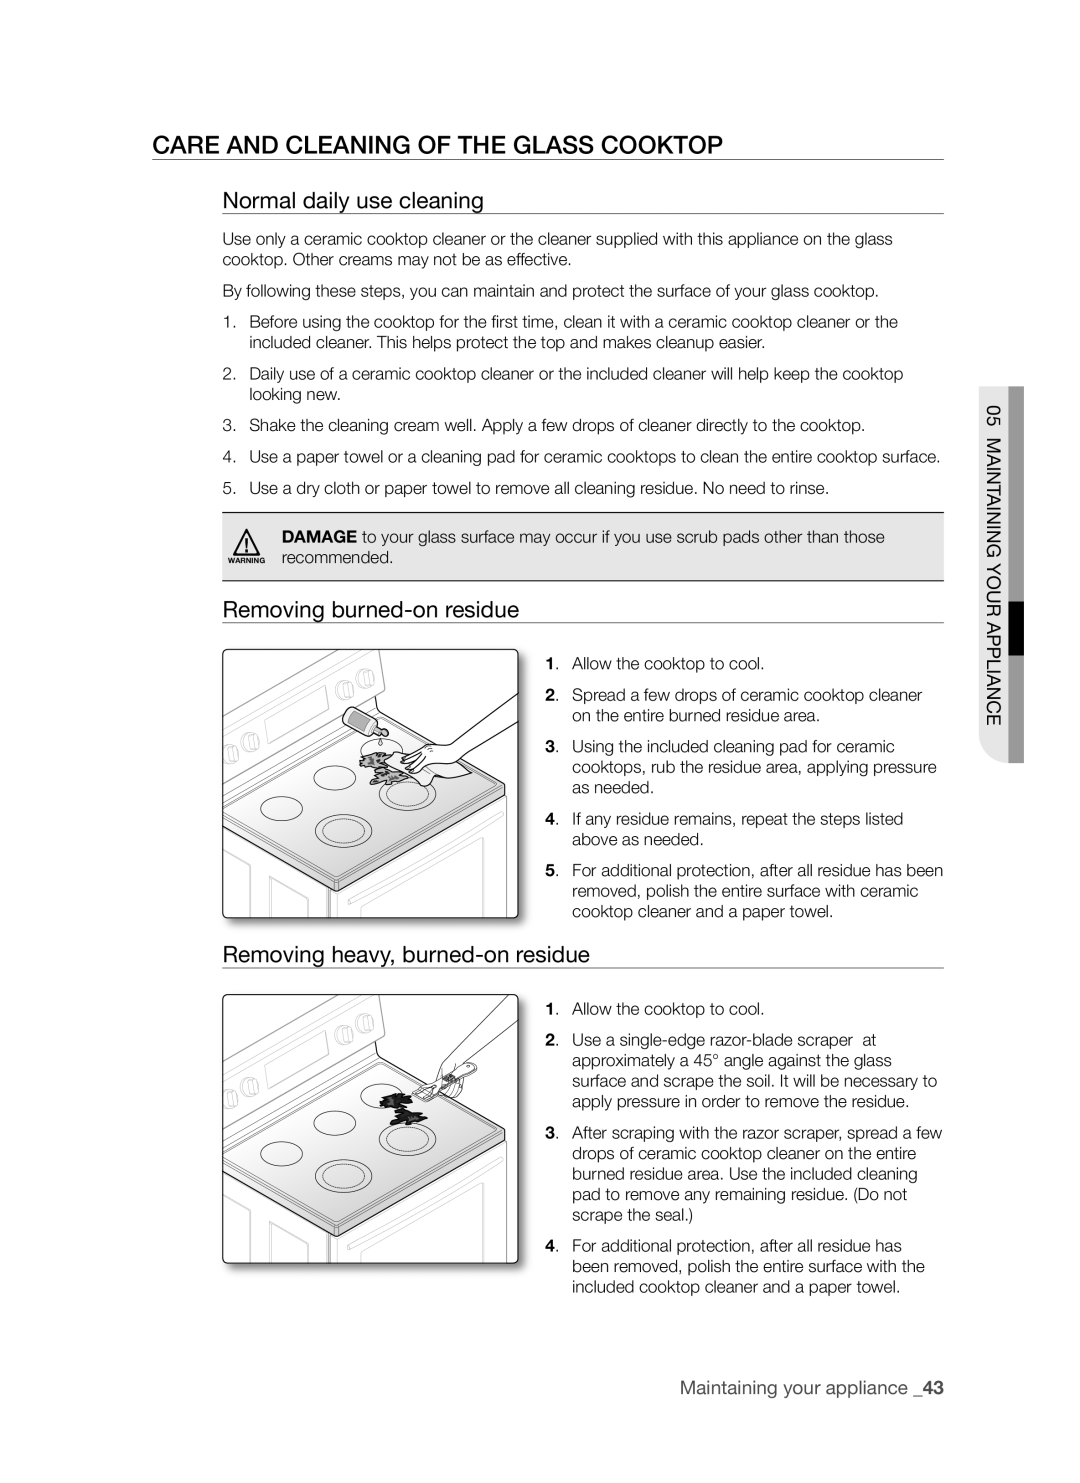 Samsung FTQ353 user manual Care And Cleaning Of The Glass Cooktop, Normal daily use cleaning, Removing burned-on residue 